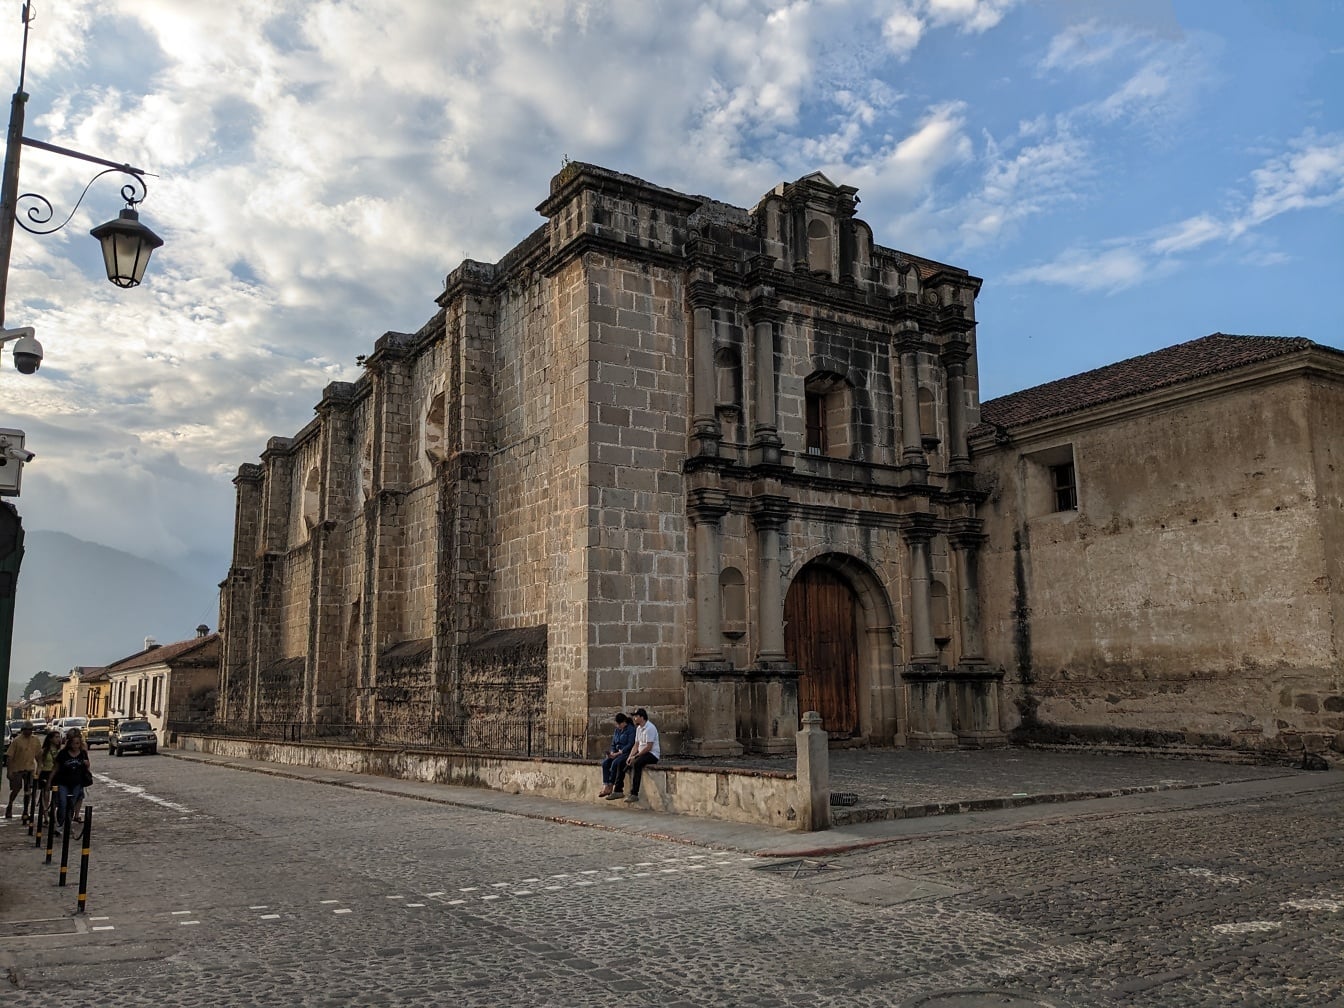 Ruins of stone building in Antigua Guatemala with a couple of people sitting on a street